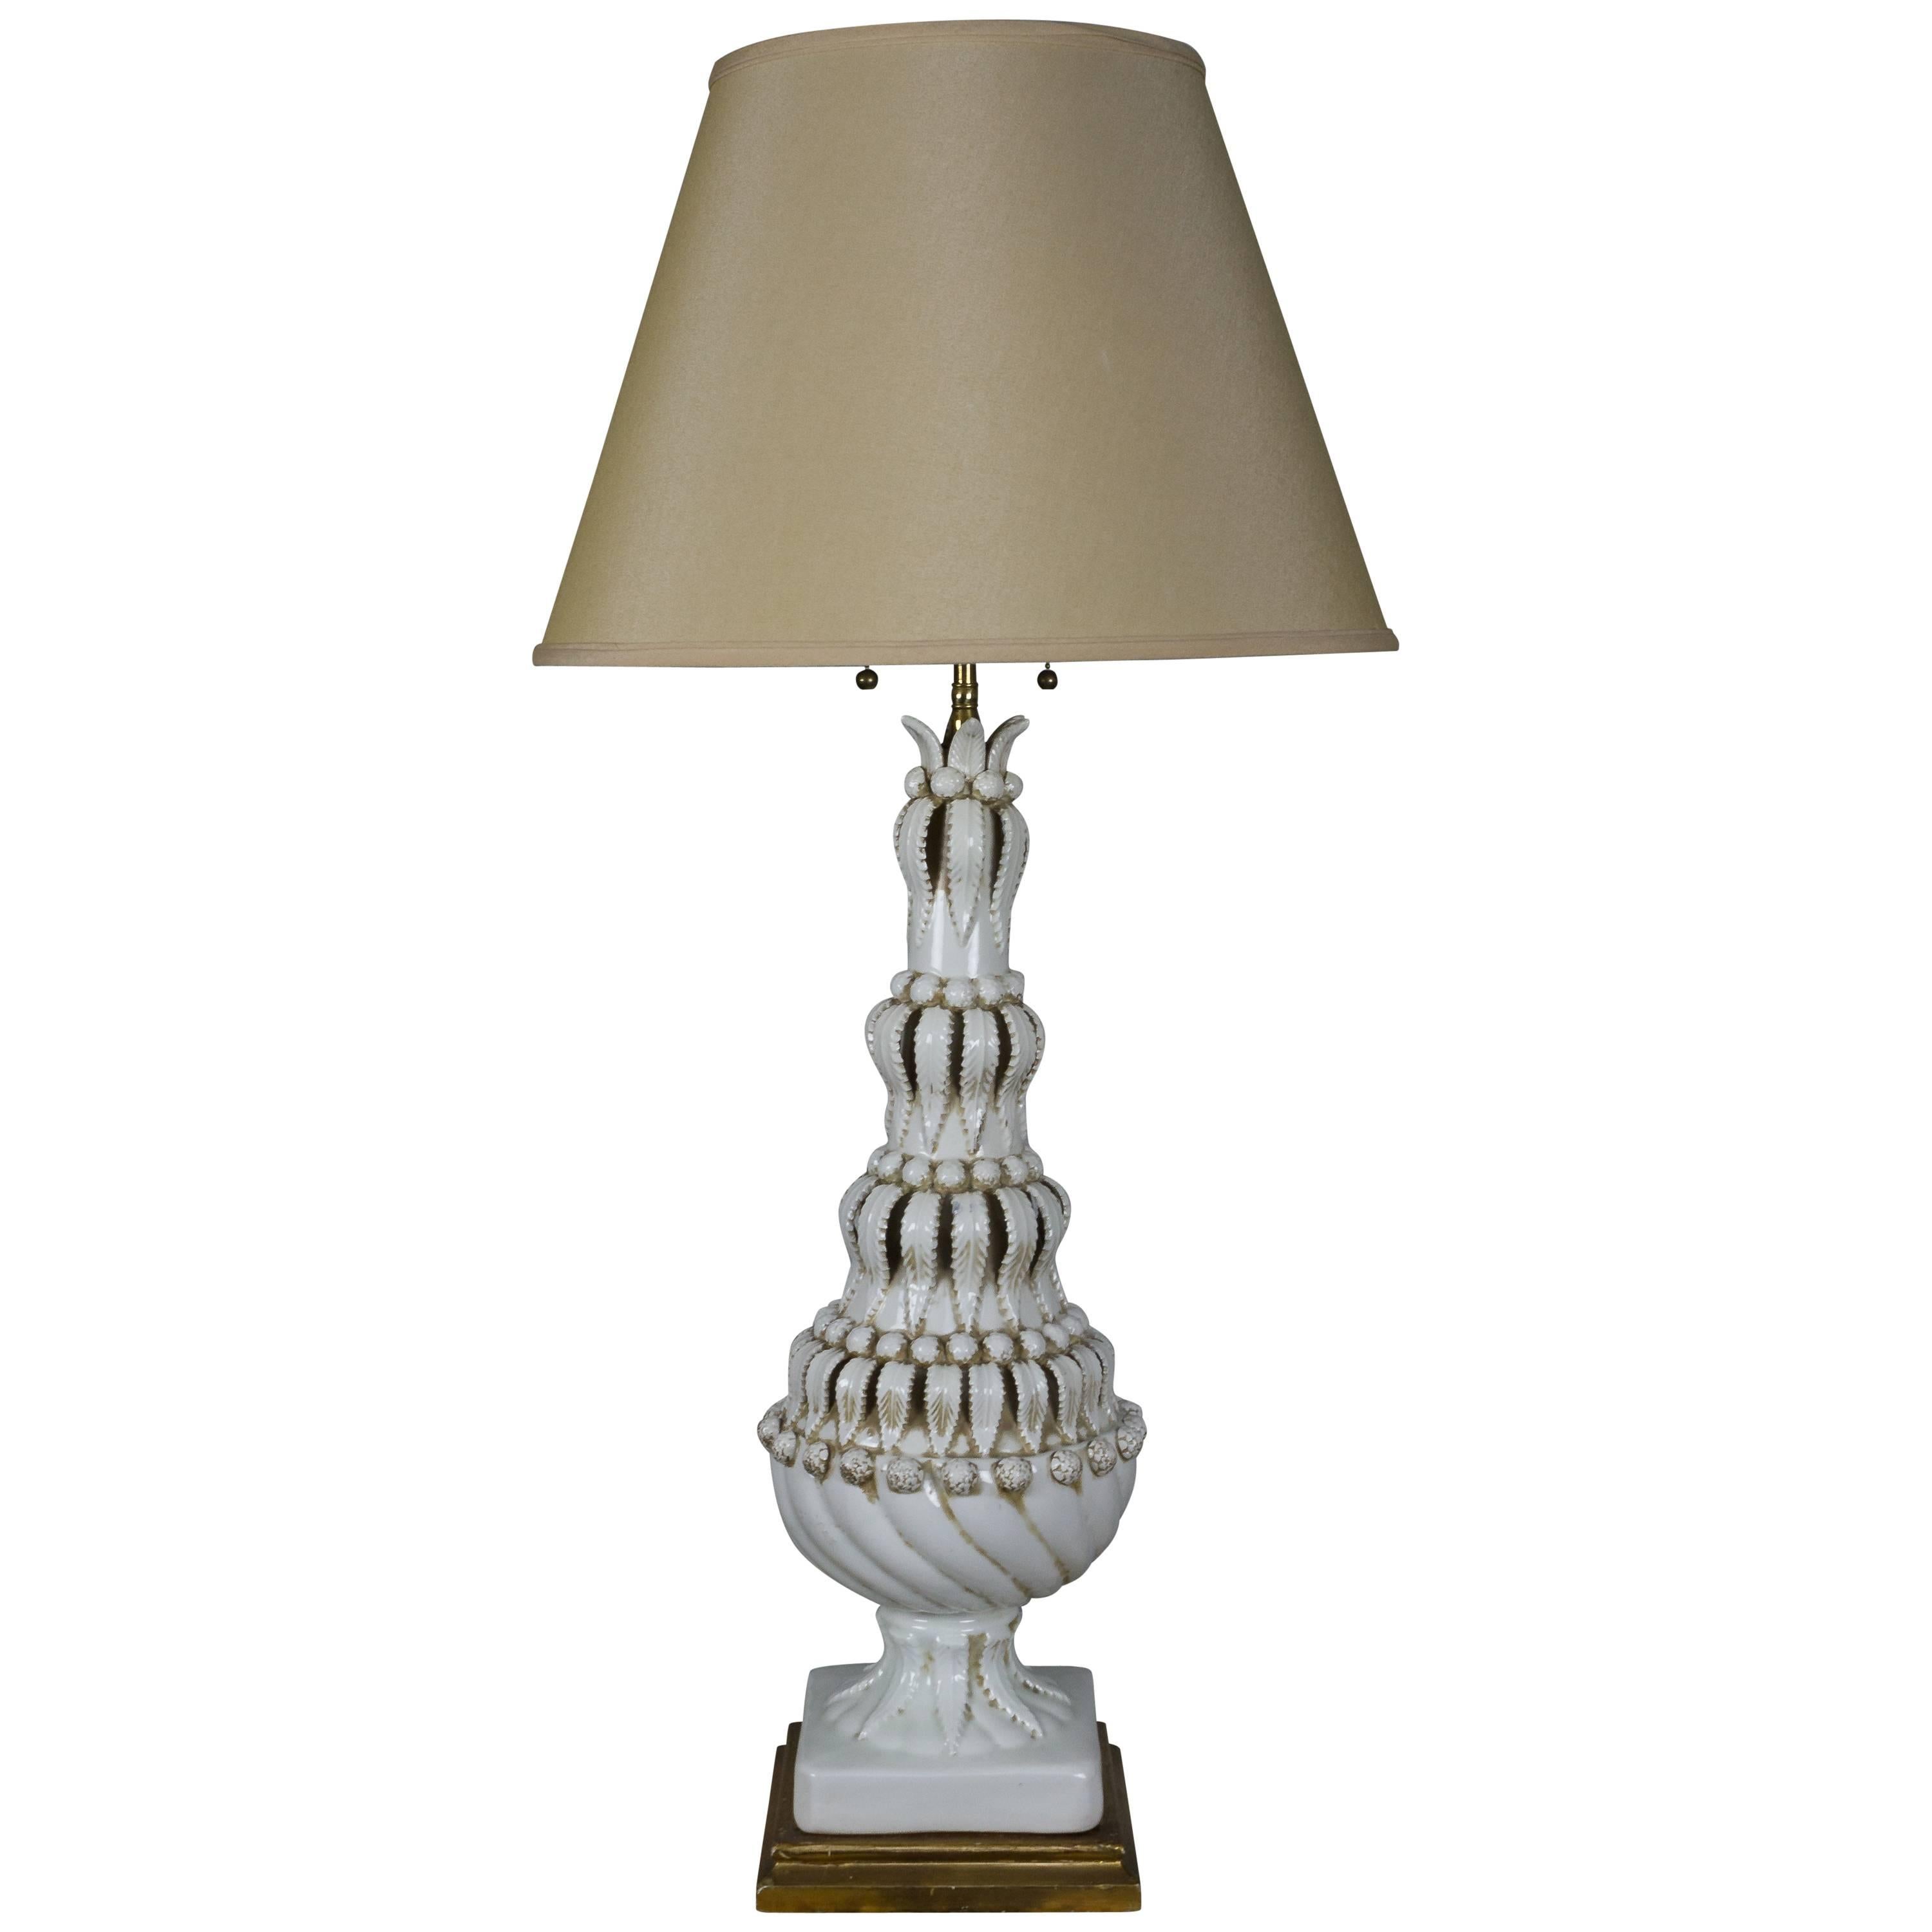 Ornate Spanish Ceramic Table Lamp With Leaf Decorations For Sale